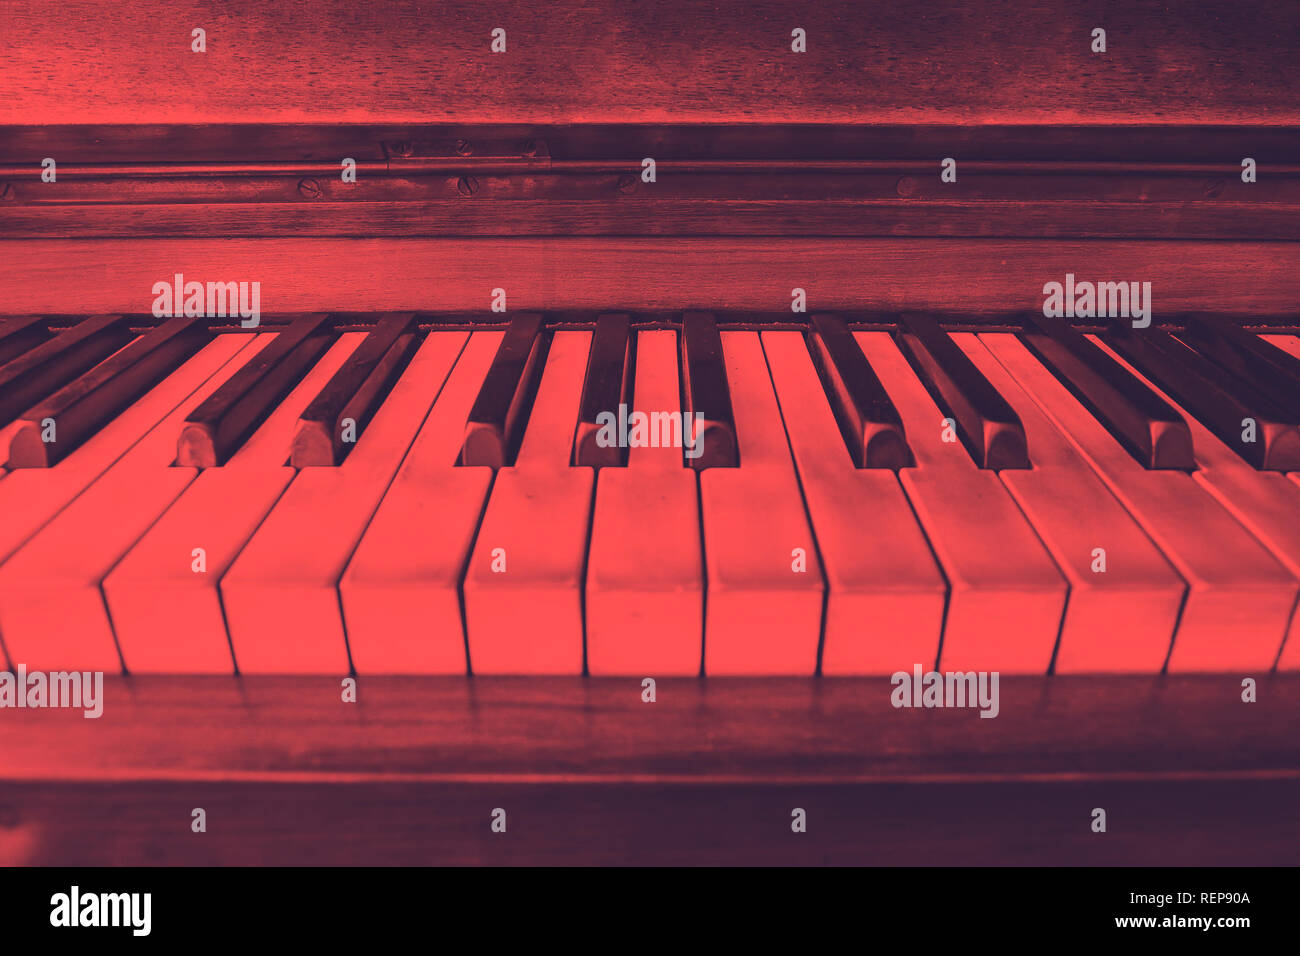 close-up view of the keys of a ancient ruined piano. Red duotone effect Stock Photo